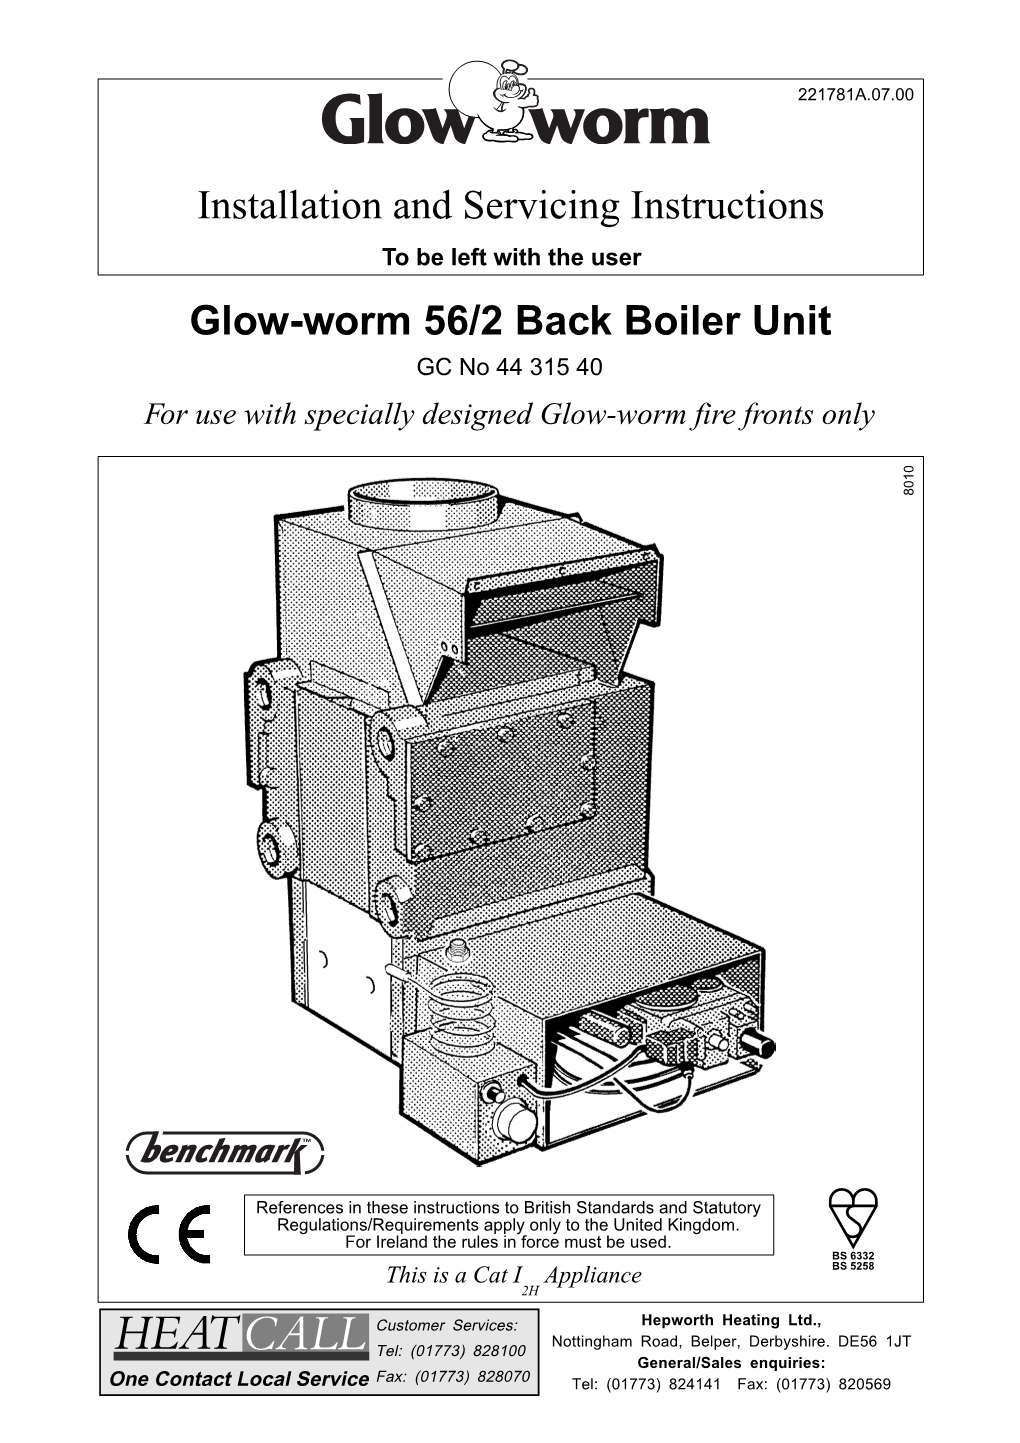 Installation and Servicing Instructions Glow-Worm 56/2 Back Boiler Unit